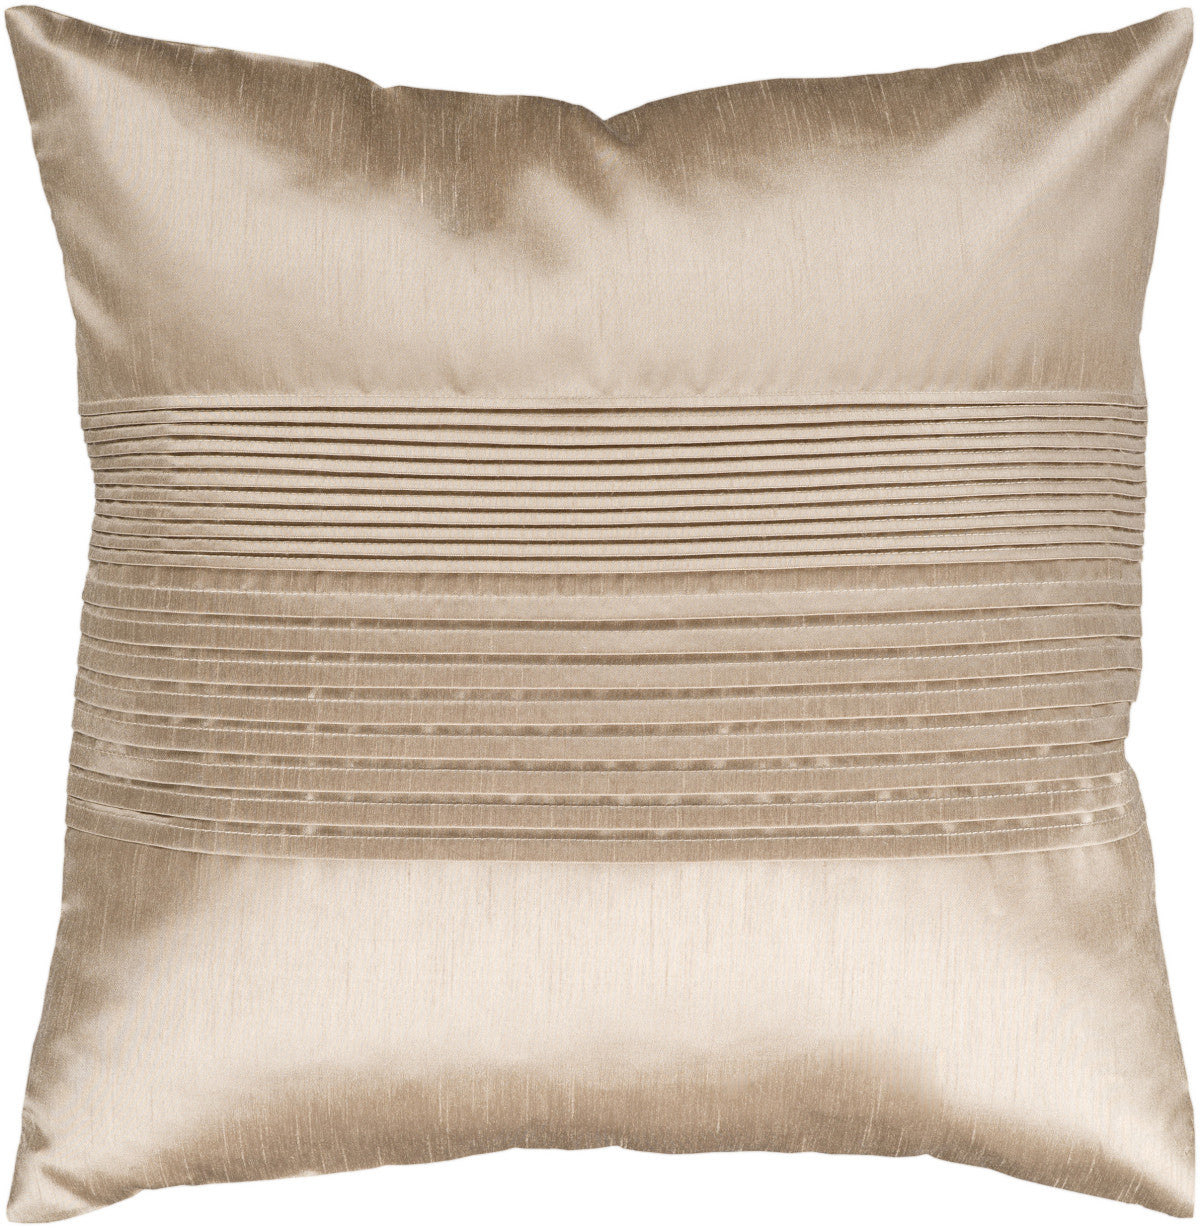 Surya Solid Pleated Lori Lee HH-019 Pillow